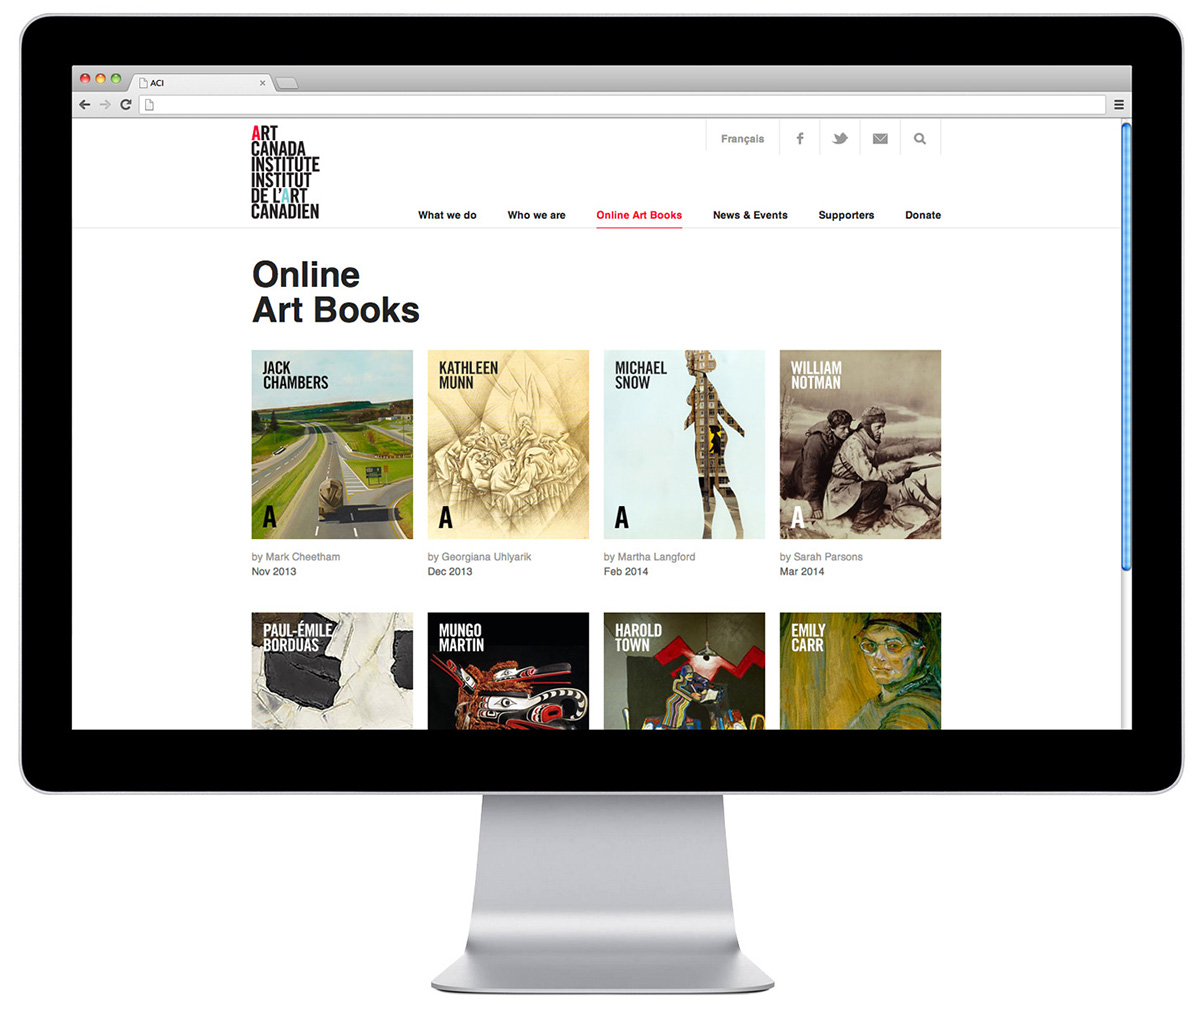 an imac, showing the Art Canada Institute's roster of books including monographs on Jack Chambers, Kathleen Munn, Michael Snow, William Notman, Paul-Emile Borduas, Mungo Martin, Harold Town, and Emily Carr.